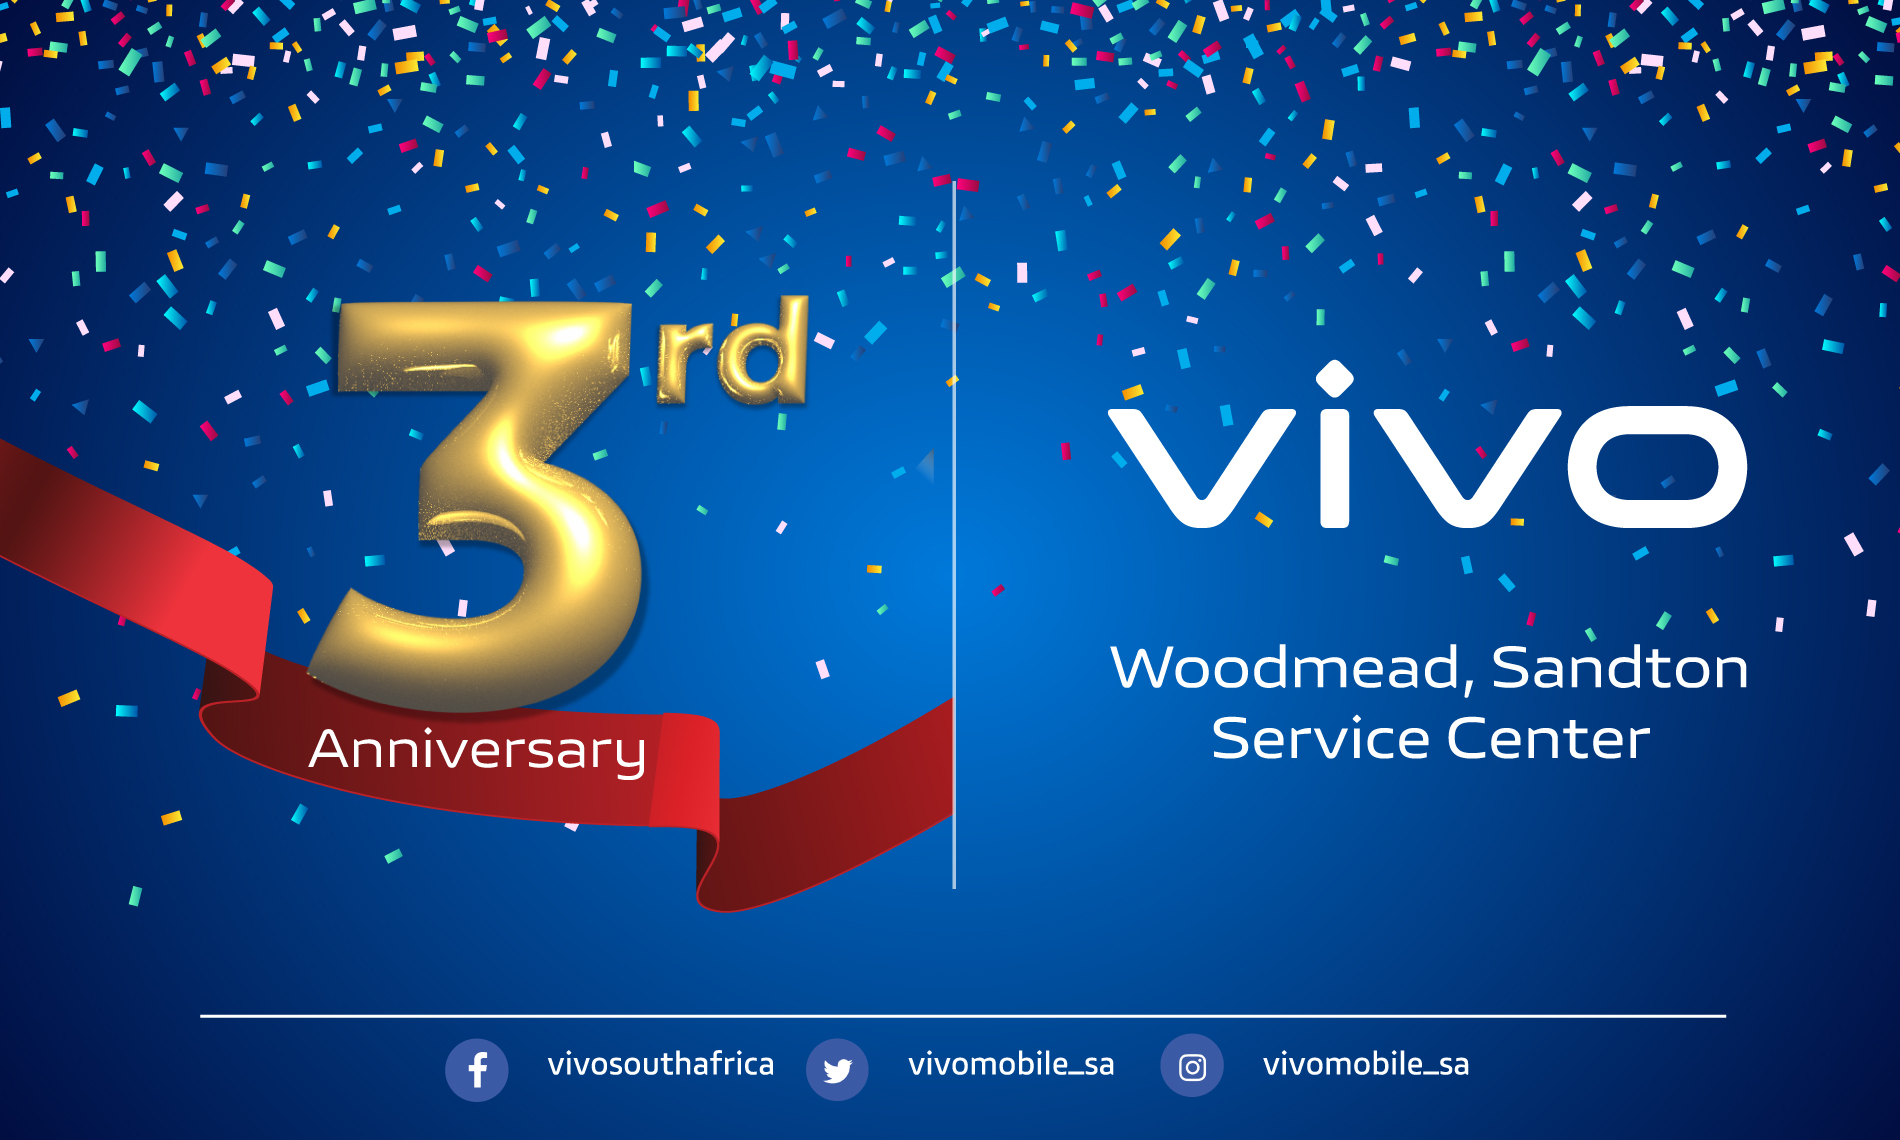 Woodmead, Sandton official vivo service center is turning 3.